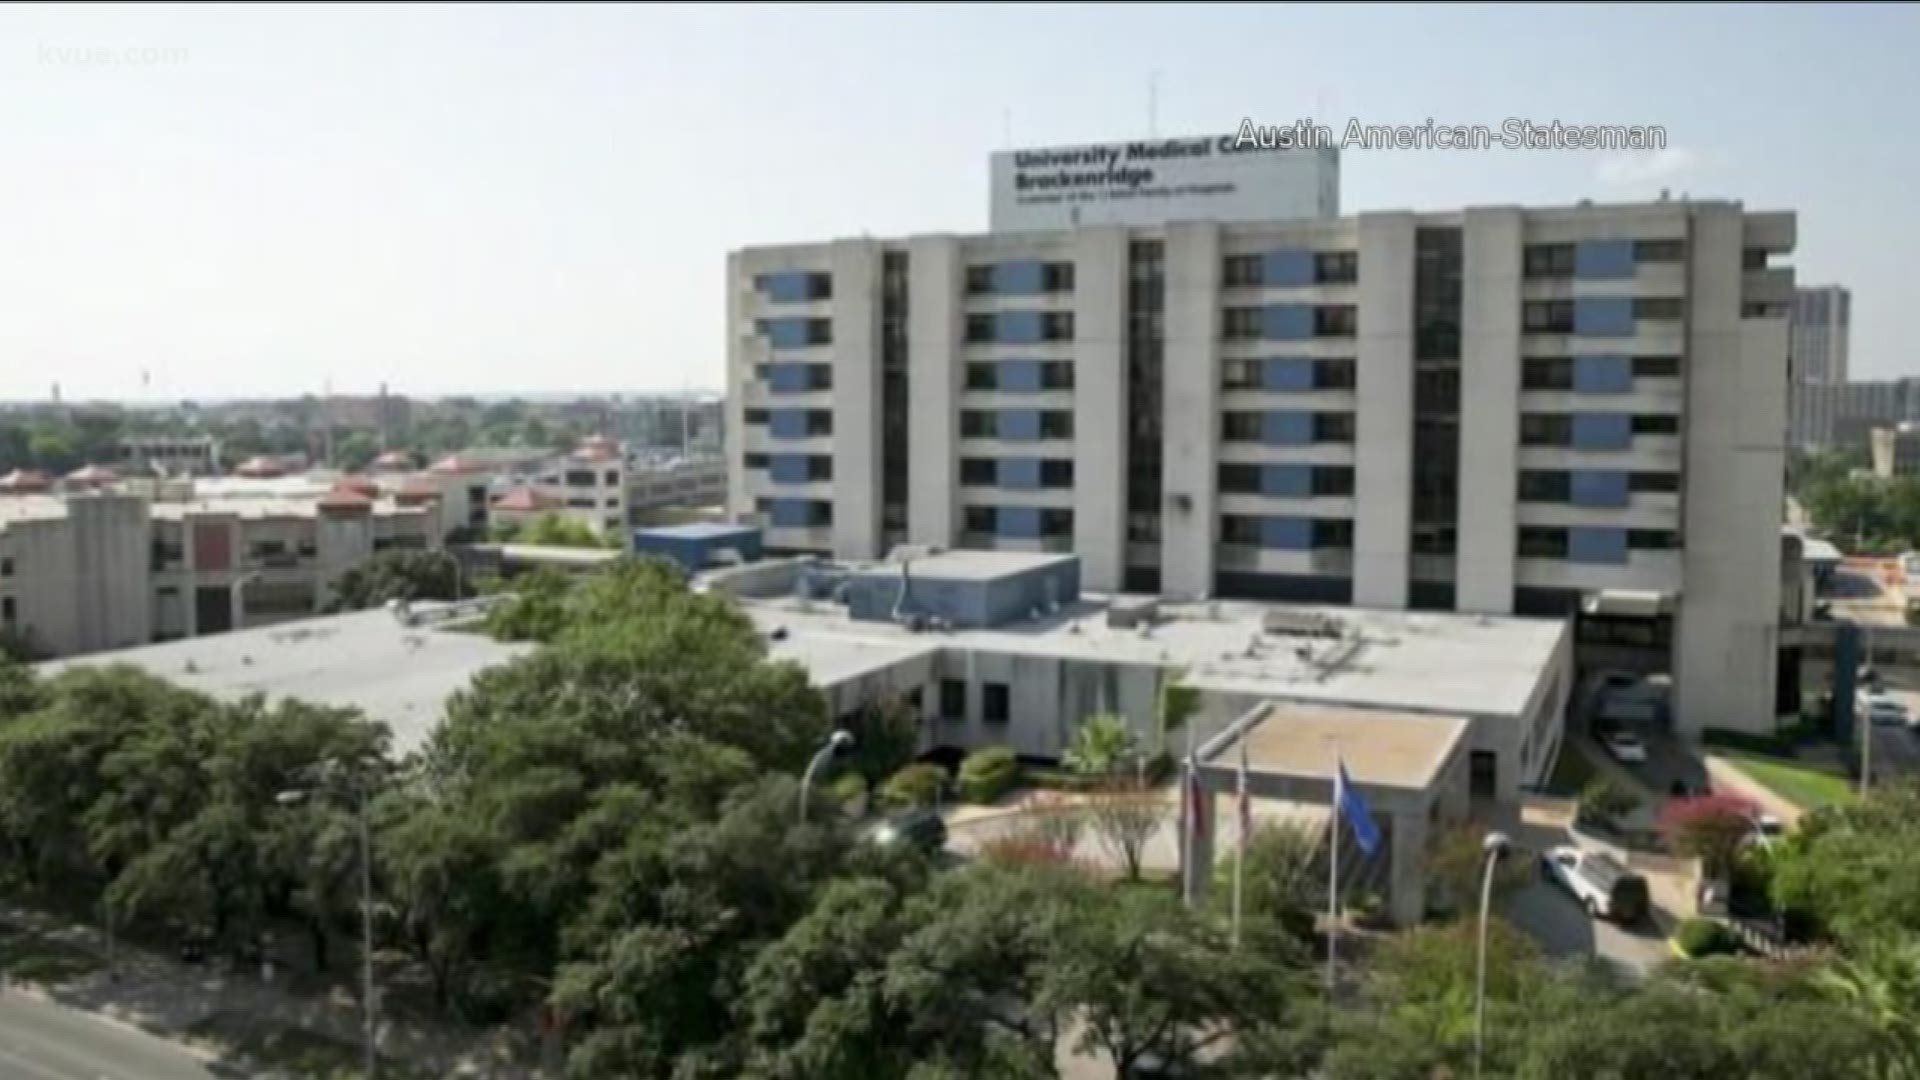 It stood tall in the heart of Austin for 50 years, but soon it’ll come down. The University Medical Center Brackenridge Tower is part of the former hospital.